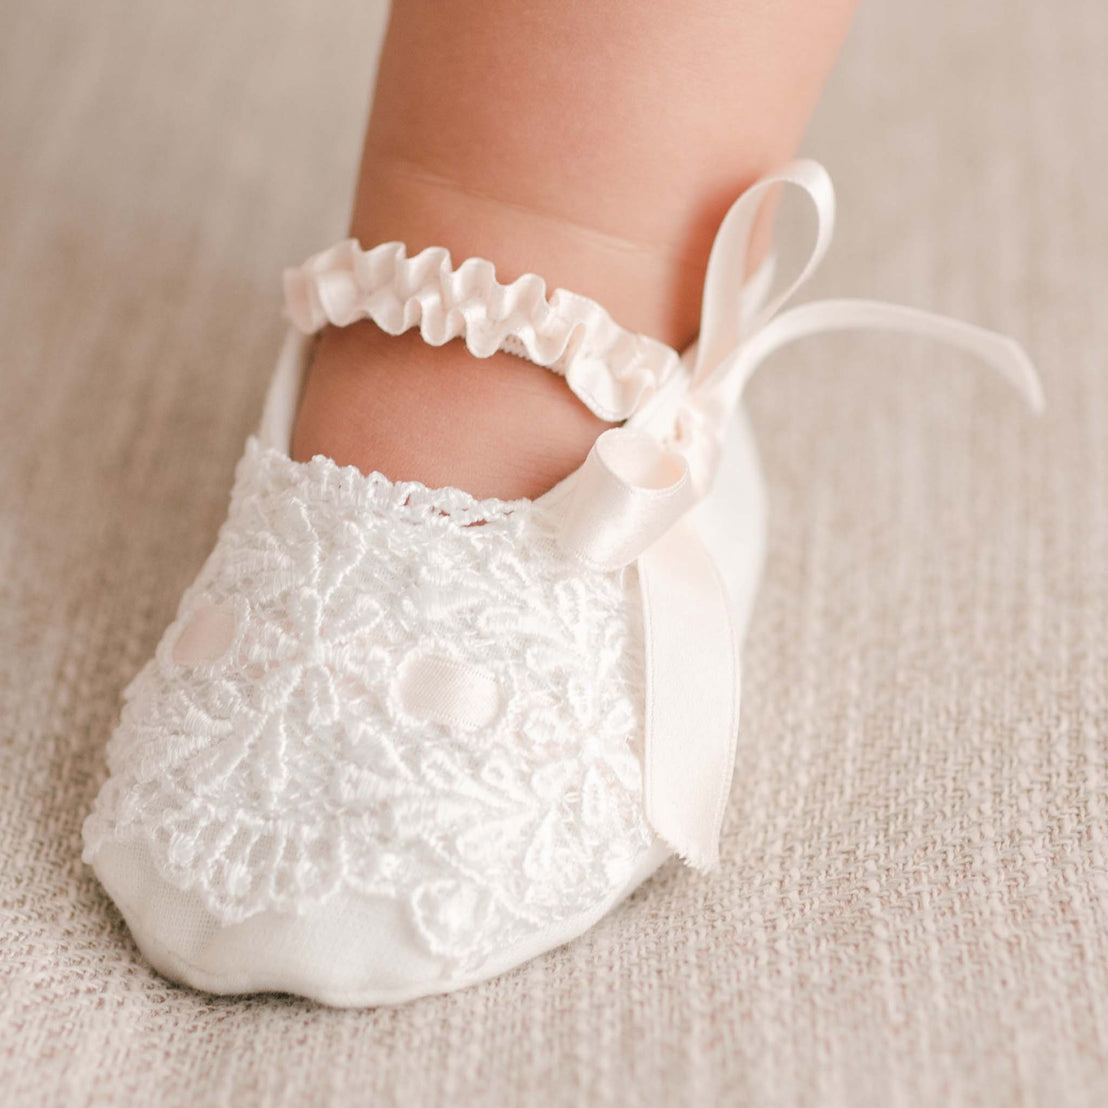 A close-up image of a baby's foot adorned with a pair of Emma Booties and a frilly ankle bracelet on a soft beige background, perfect for baptism events.